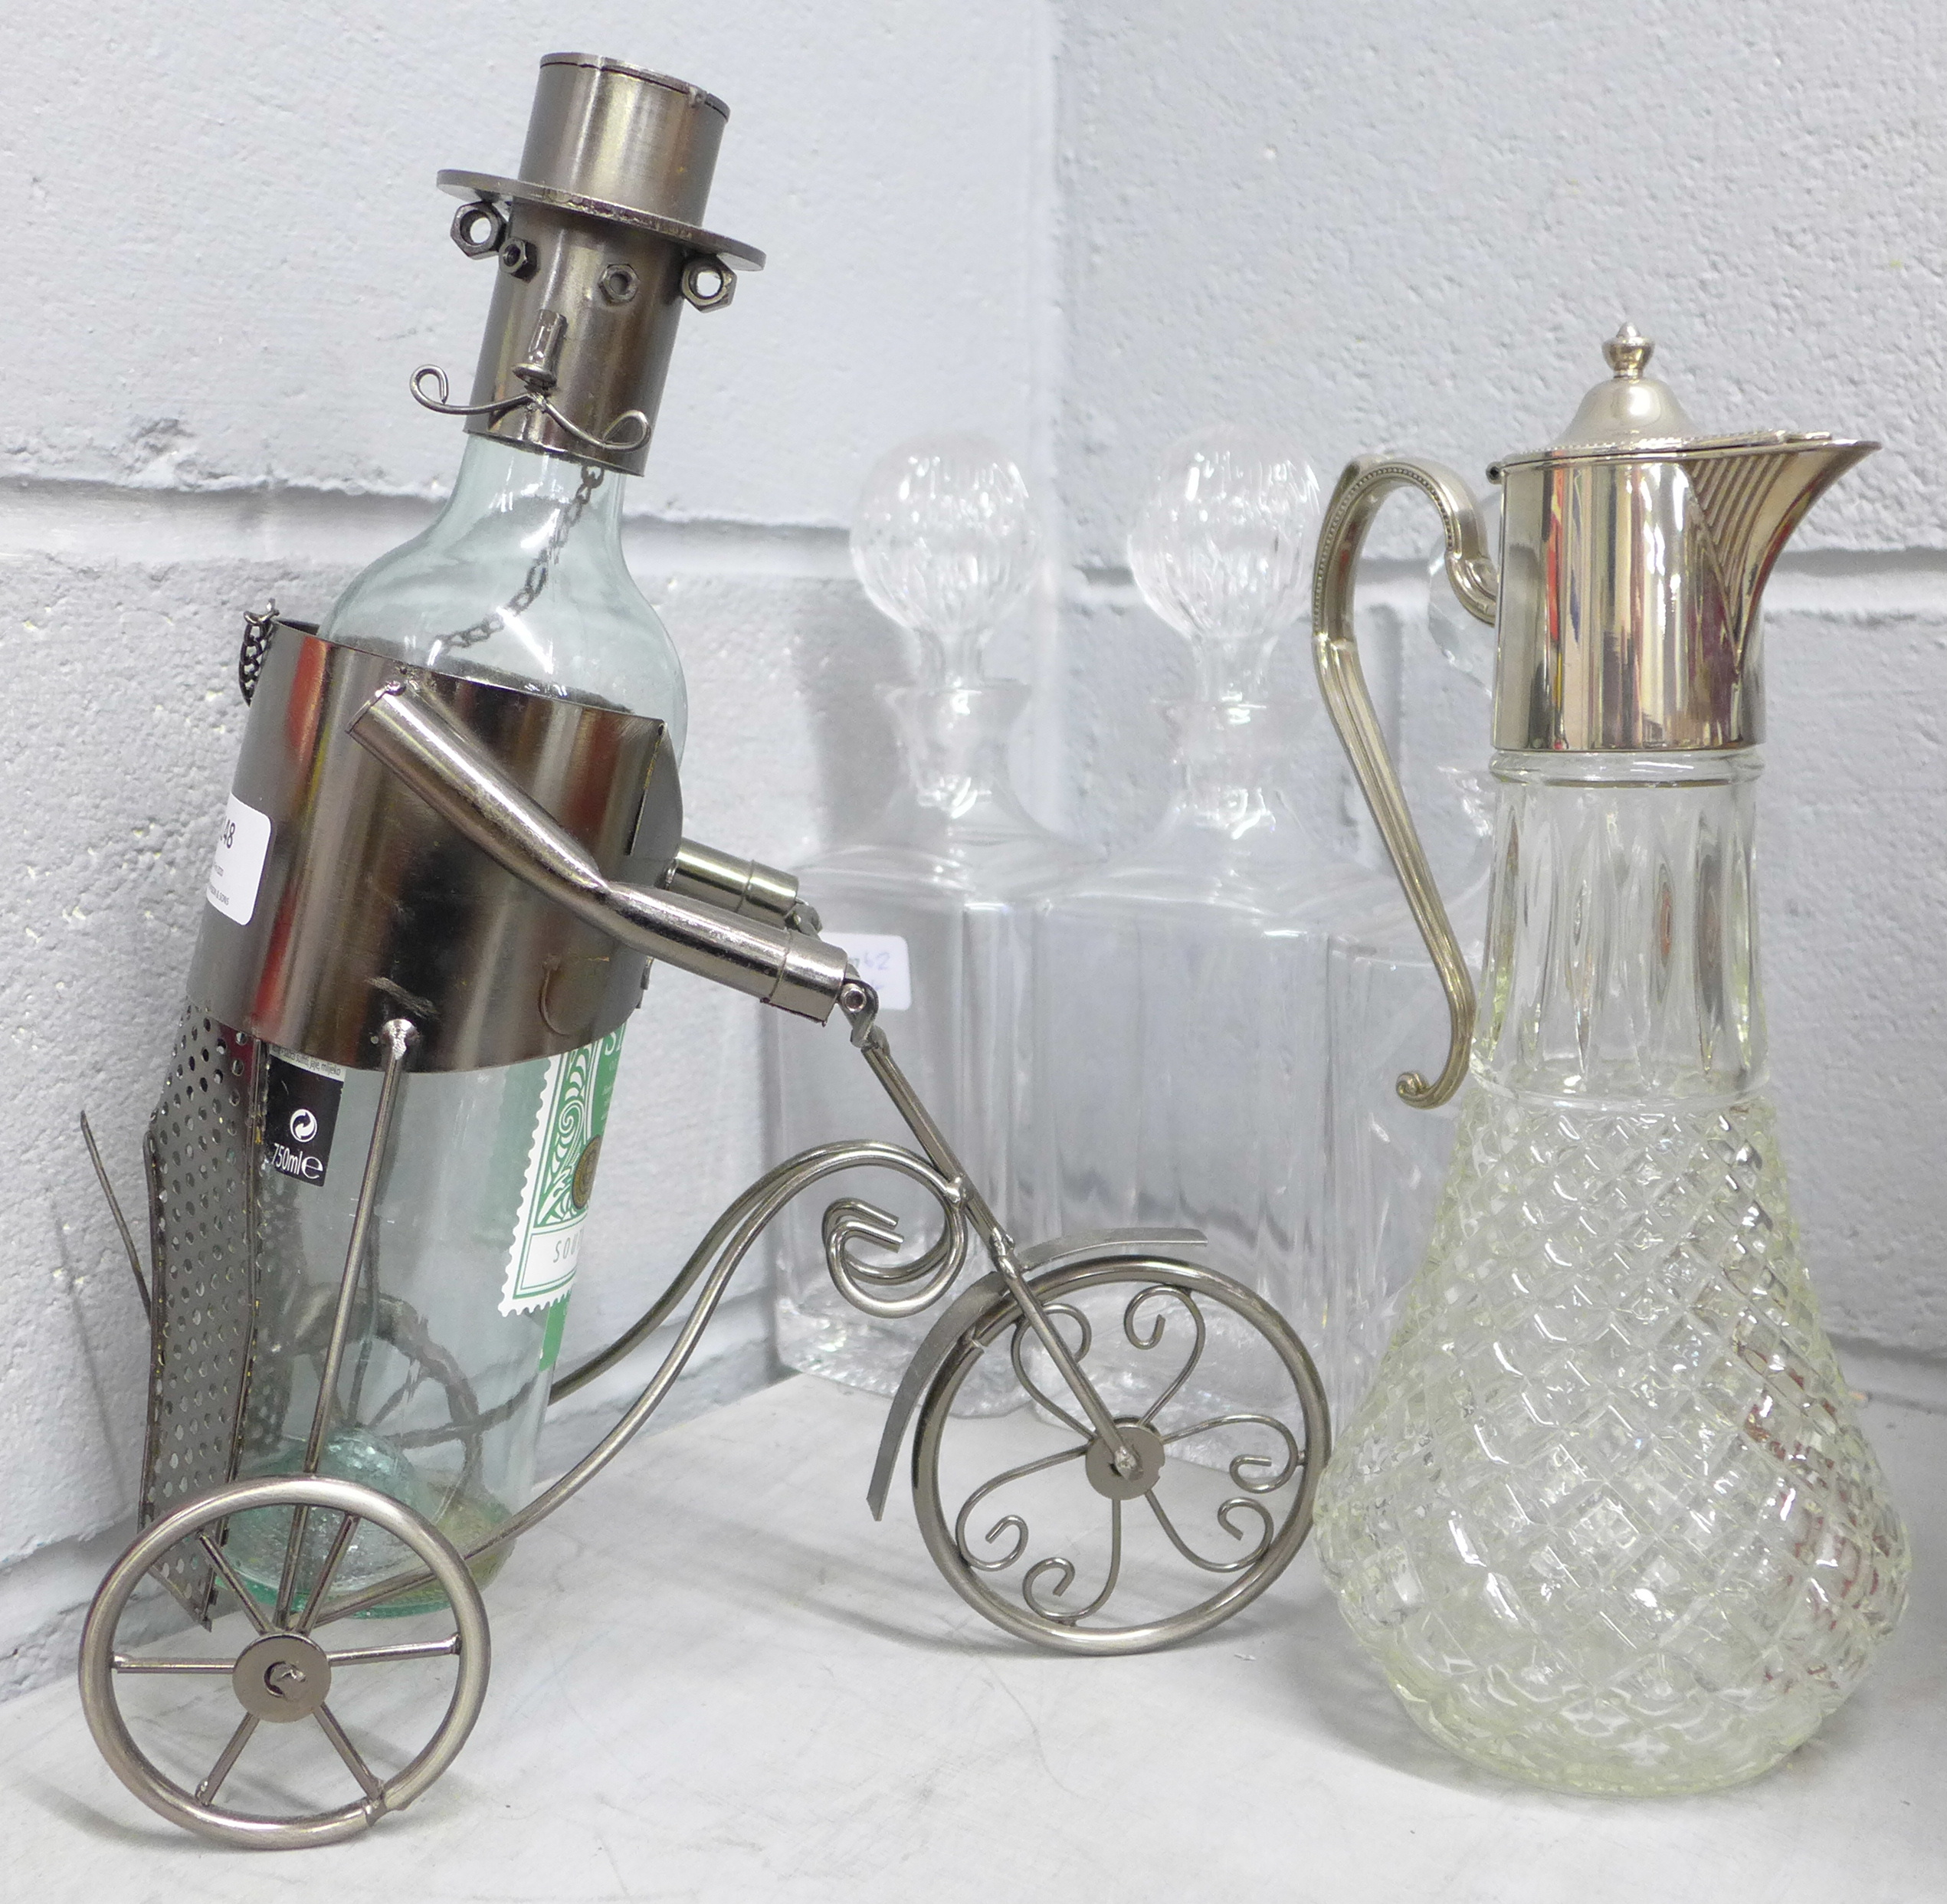 Three glass decanters, a claret jug and a novelty bottle holder